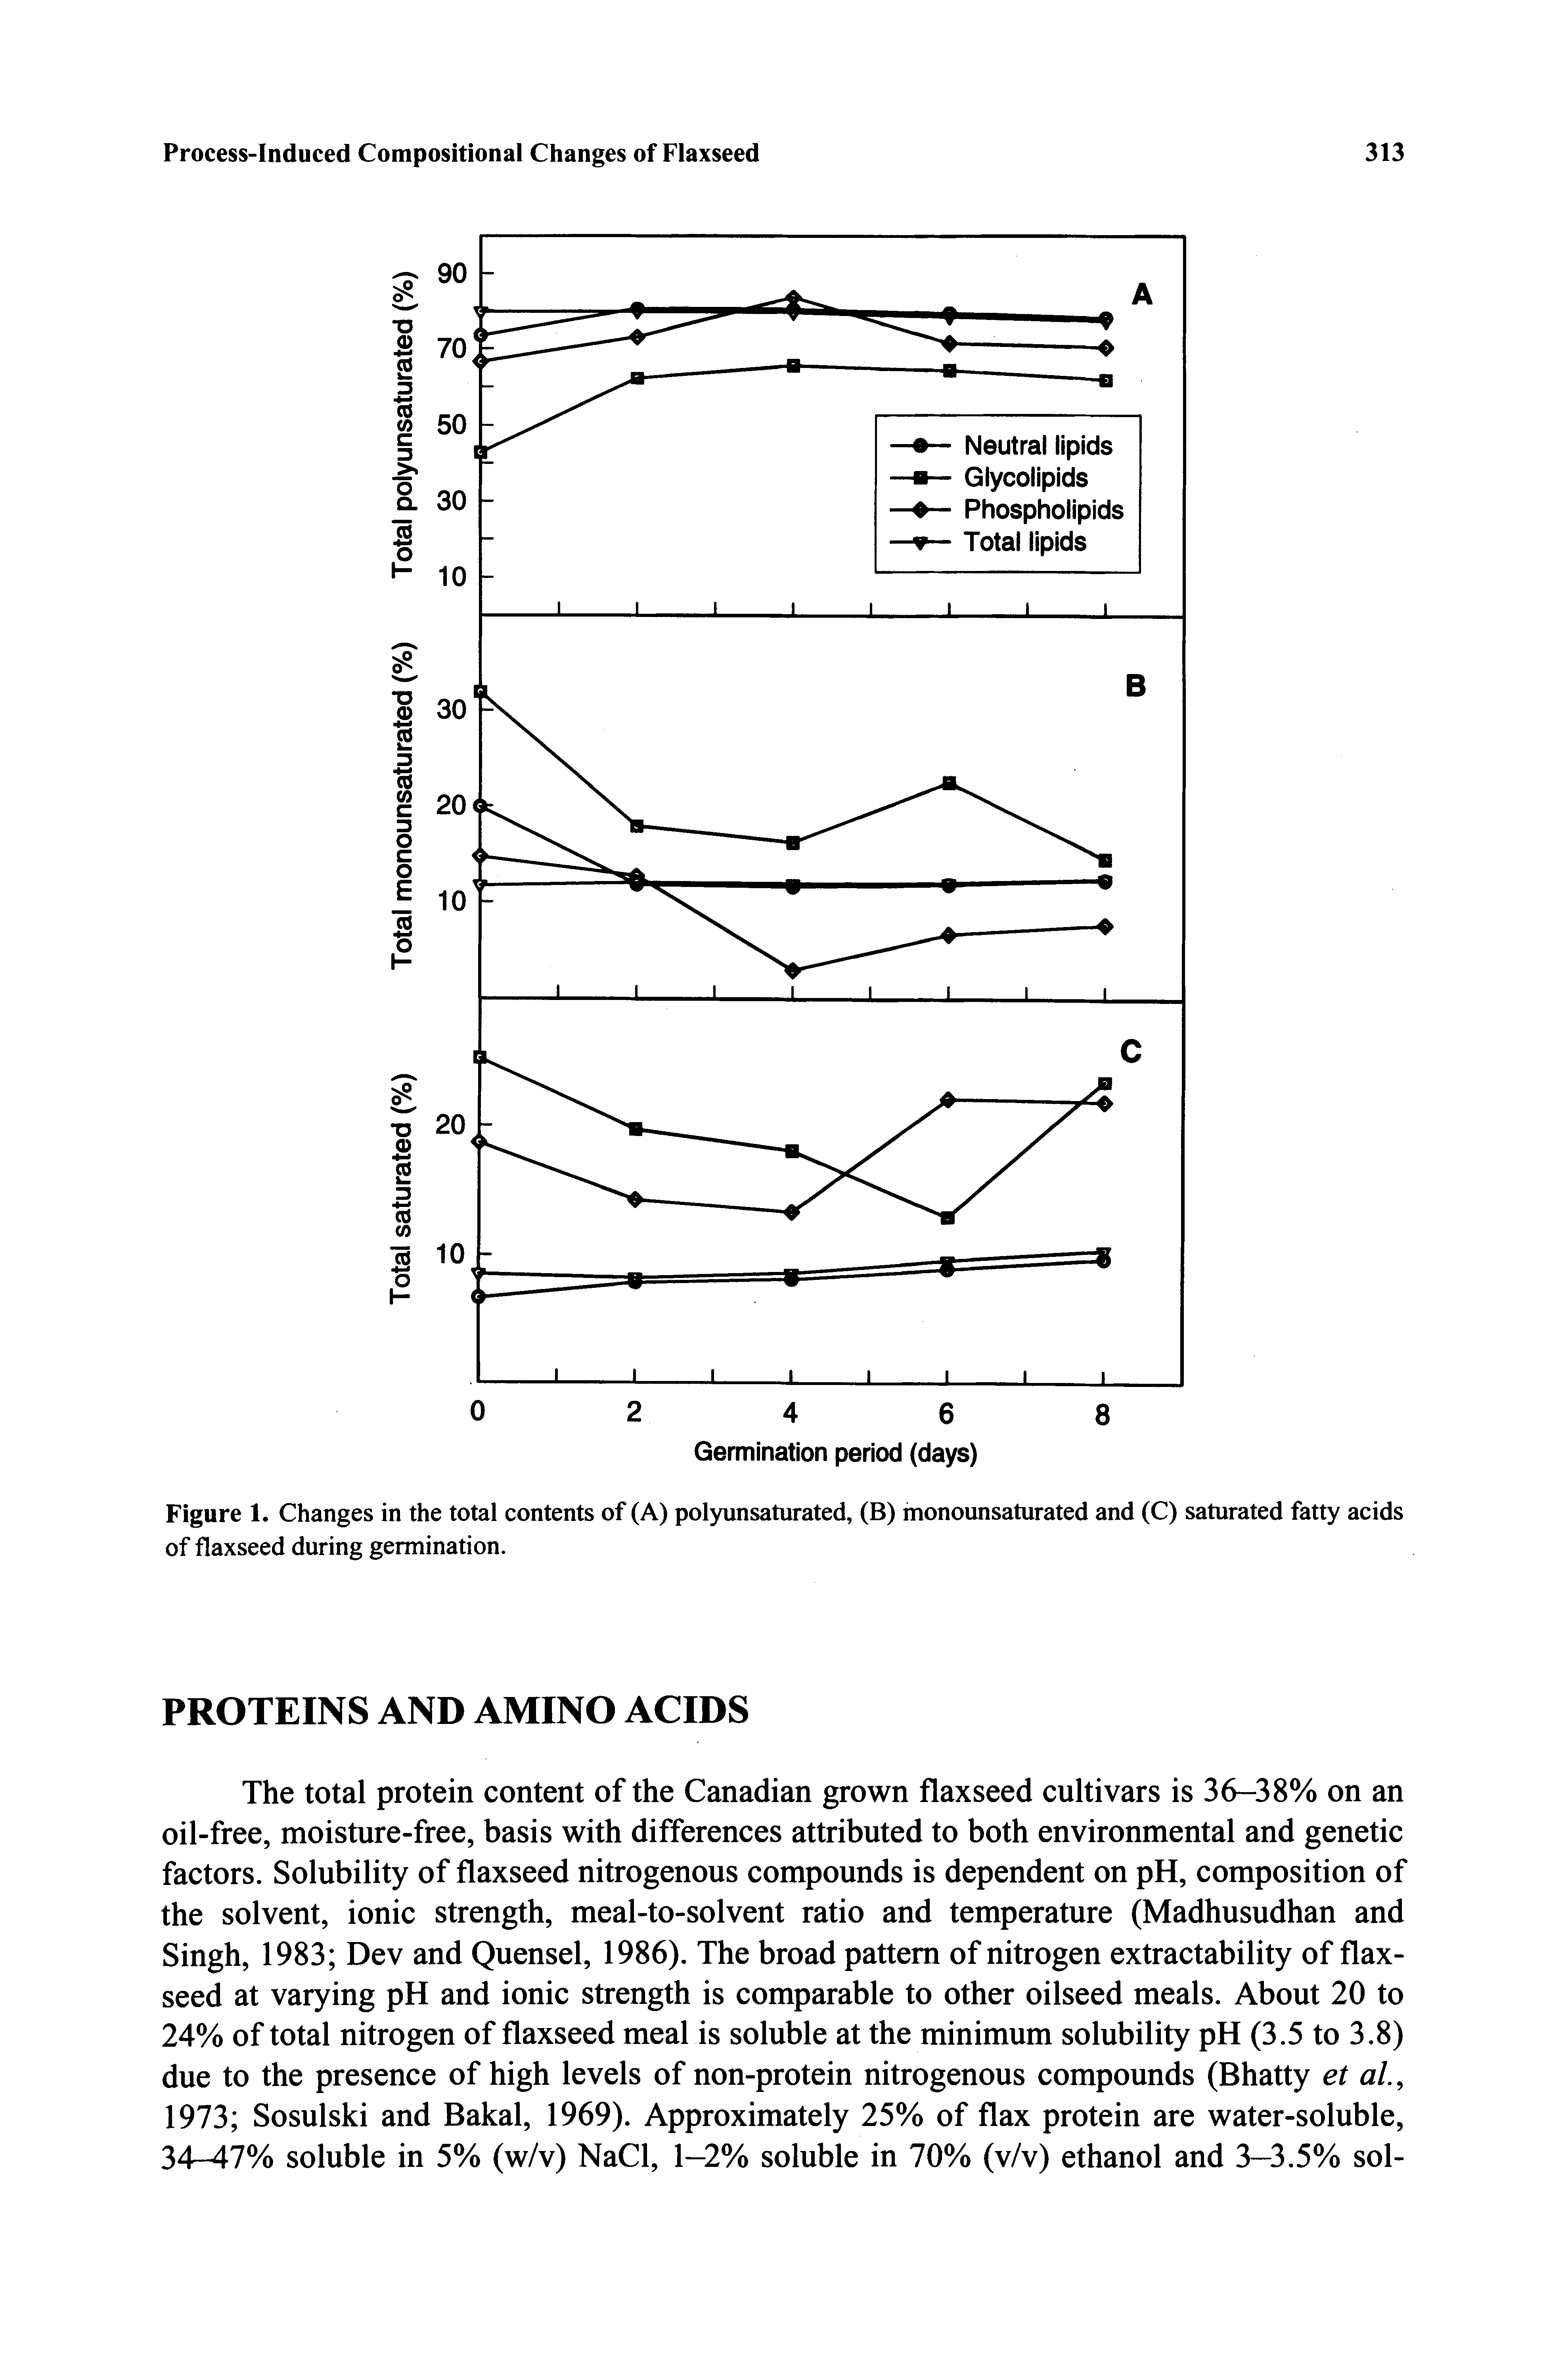 Figure 1. Changes in the total contents of (A) polyunsaturated, (B) monounsaturated and (C) saturated fatty acids of flaxseed during germination.